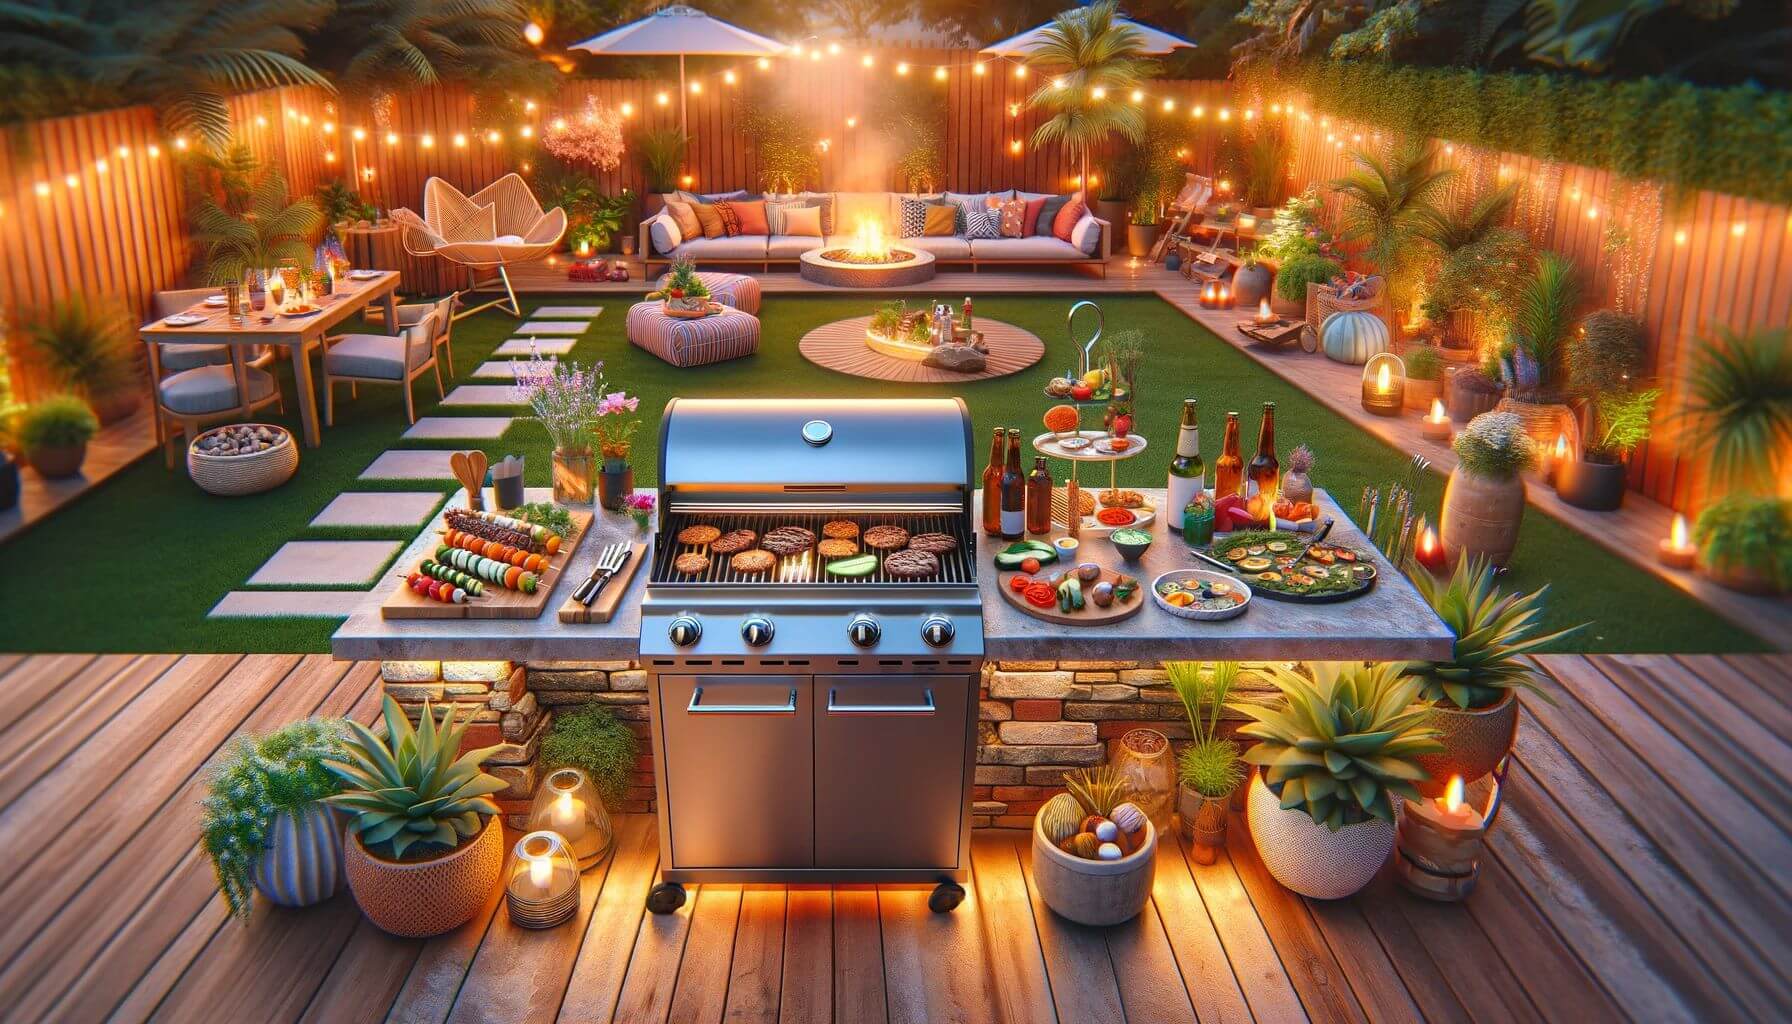 Outdoor grill ideas for summer